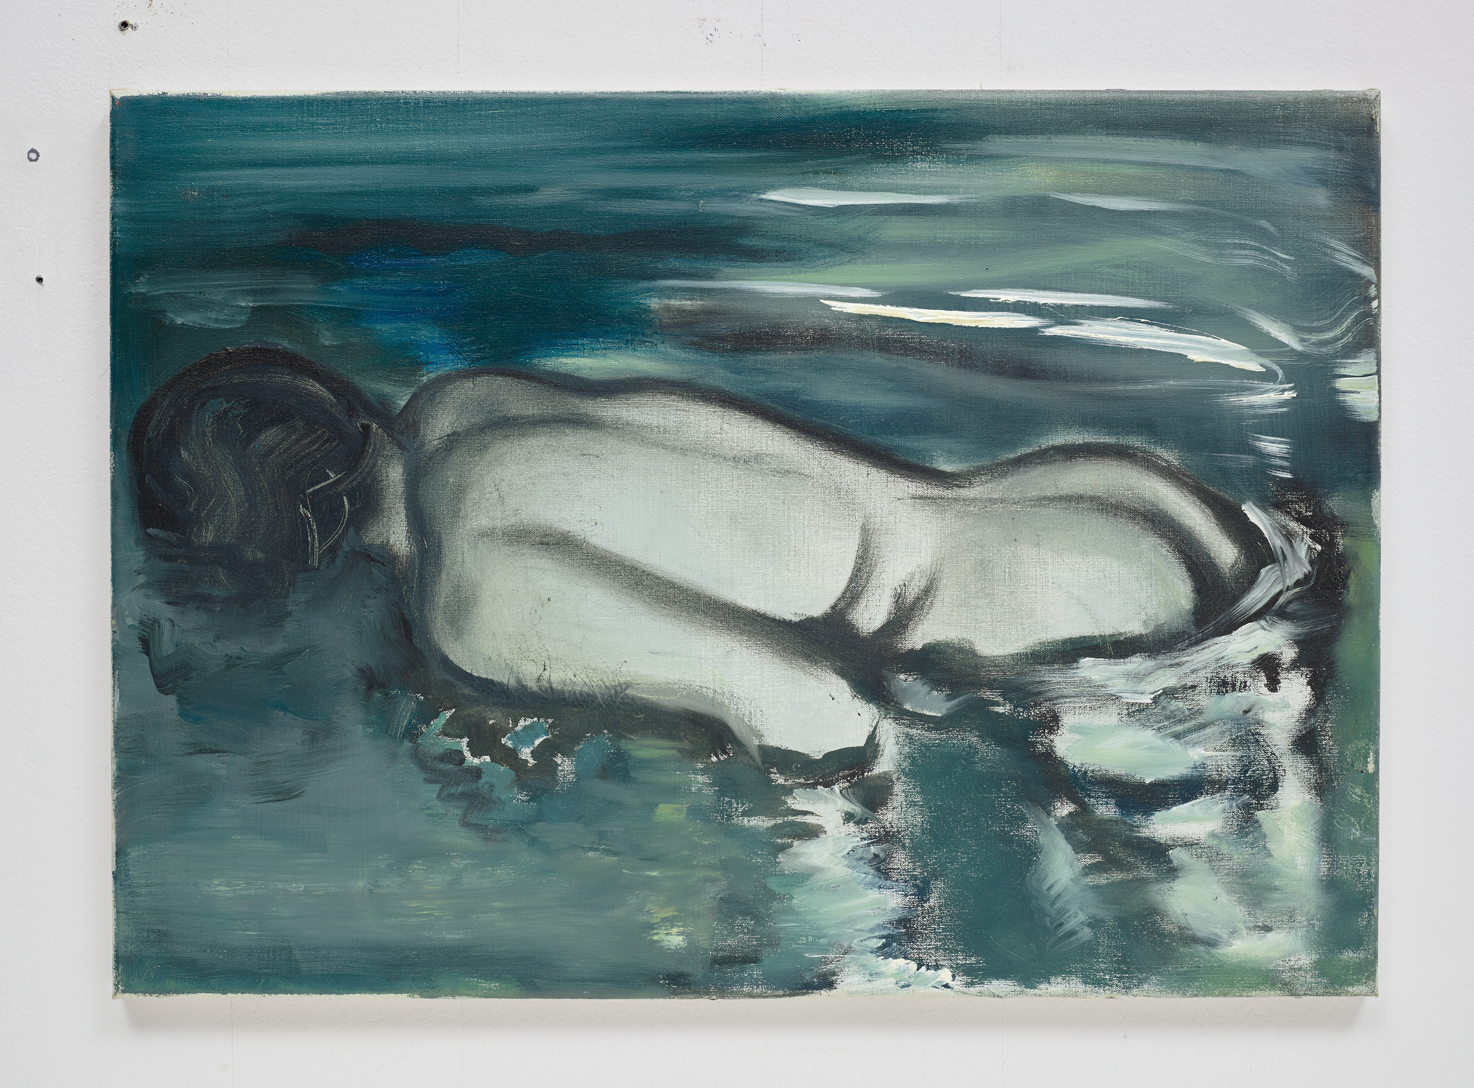 Dumas, Losing (Her Meaning), 1988